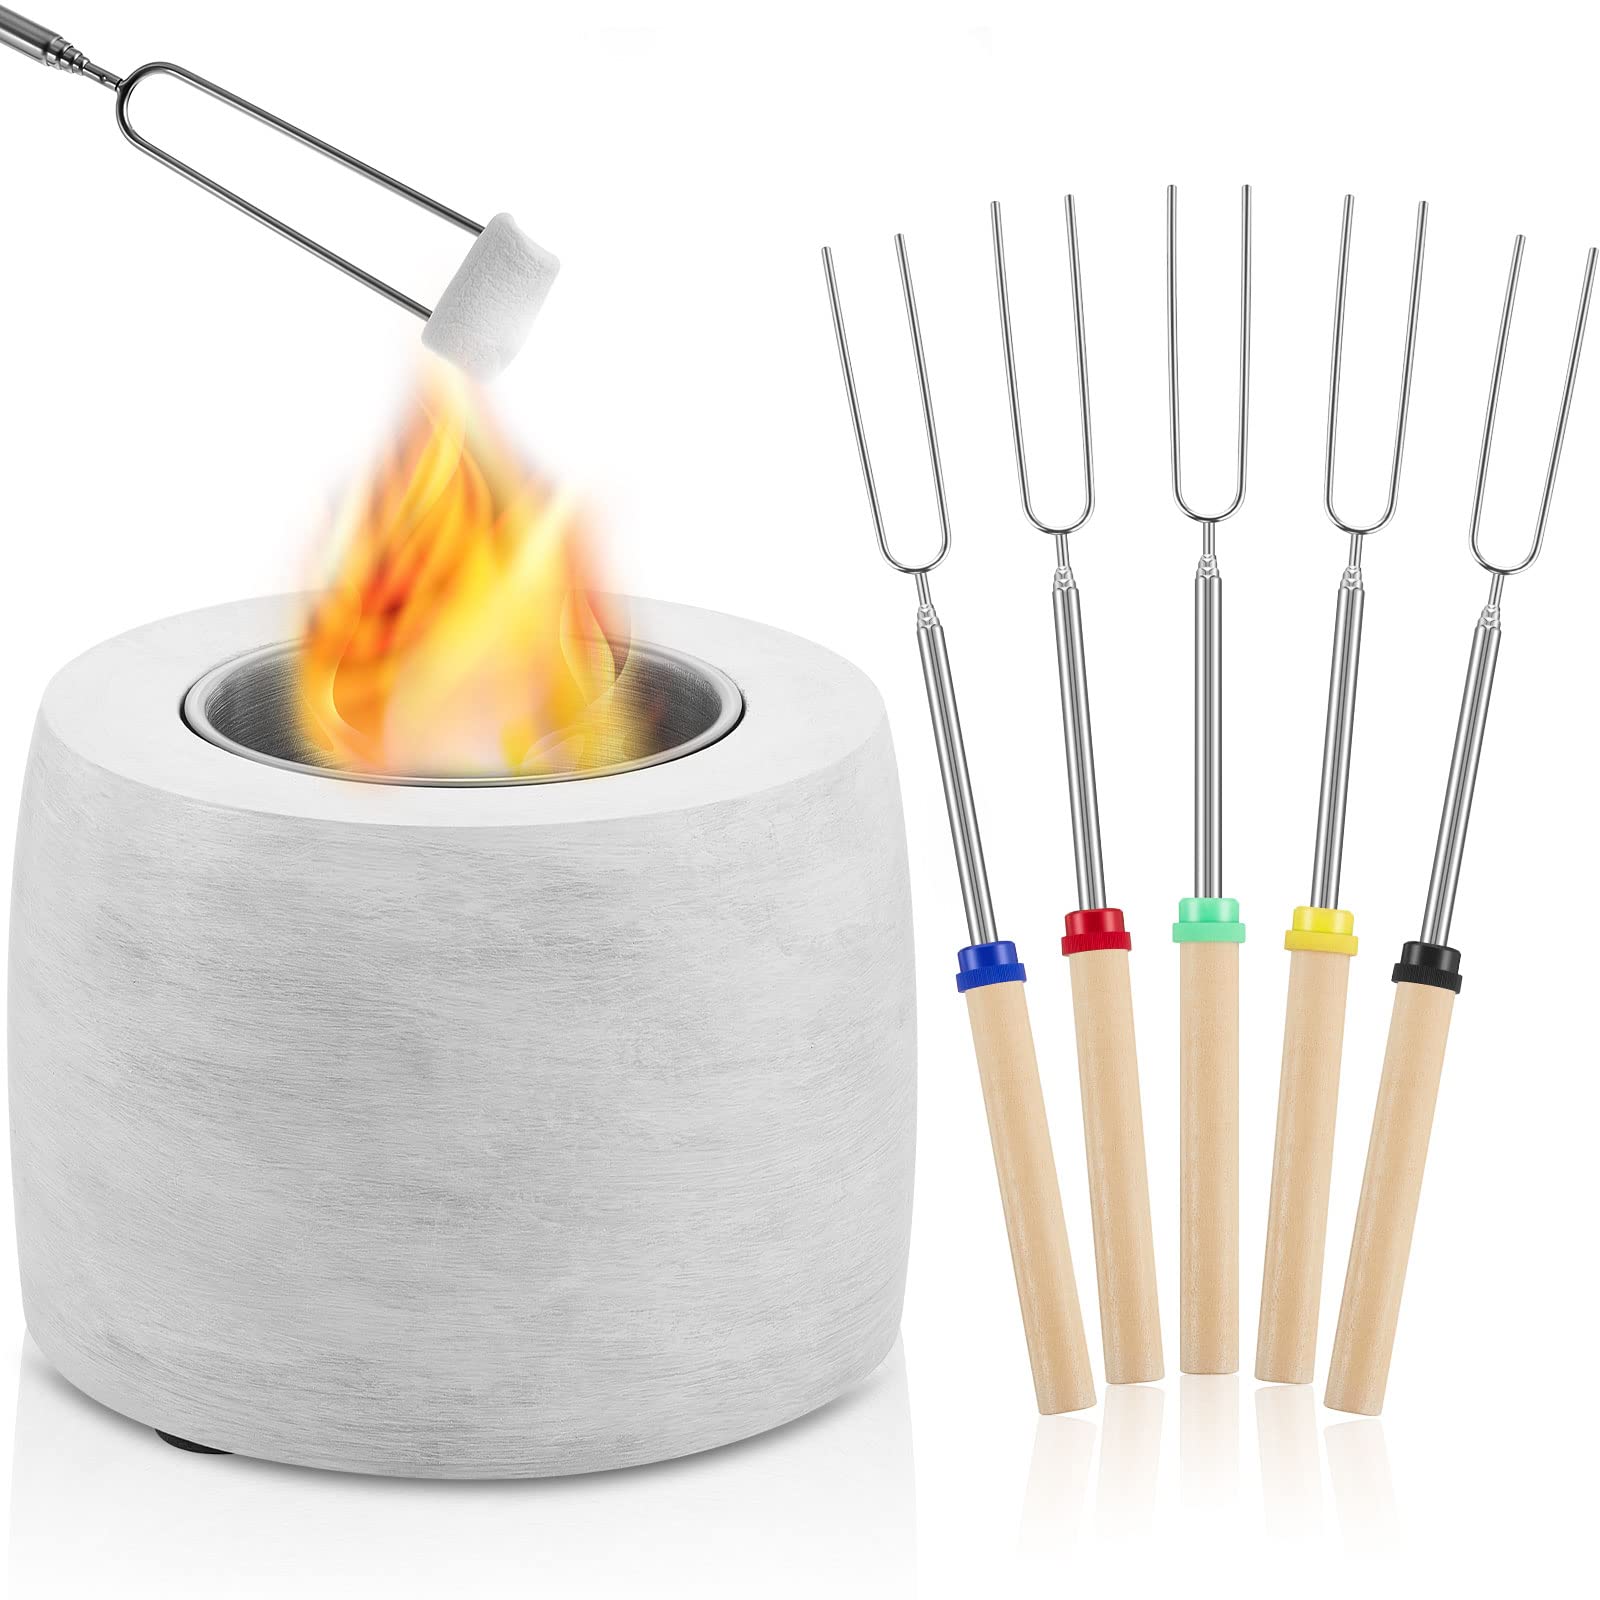 6 Pieces Tabletop Fire Pit Kit, Indoor Fire Pit Portable Smores Maker Table Top Fire Pit Bowl Tabletop Fire Bowls and 5 Pcs Marshmallow Roasting Sticks for Home Outdoor Indoor Patio Balcony Decor